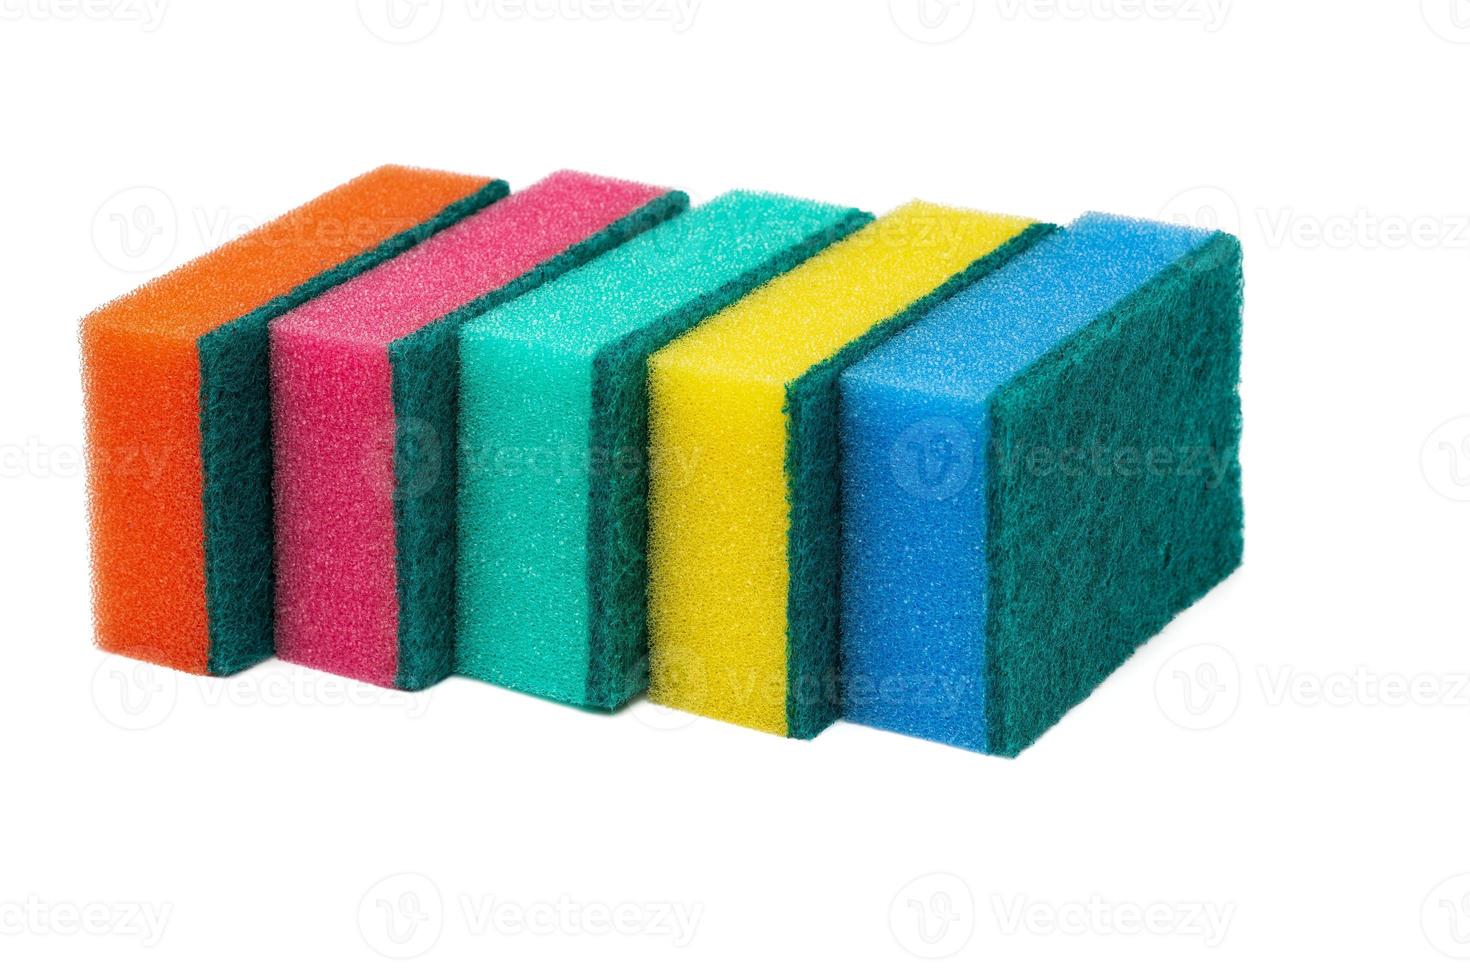 Group of foam sponges with abrasive material used by housewives who care about cleanliness in home photo